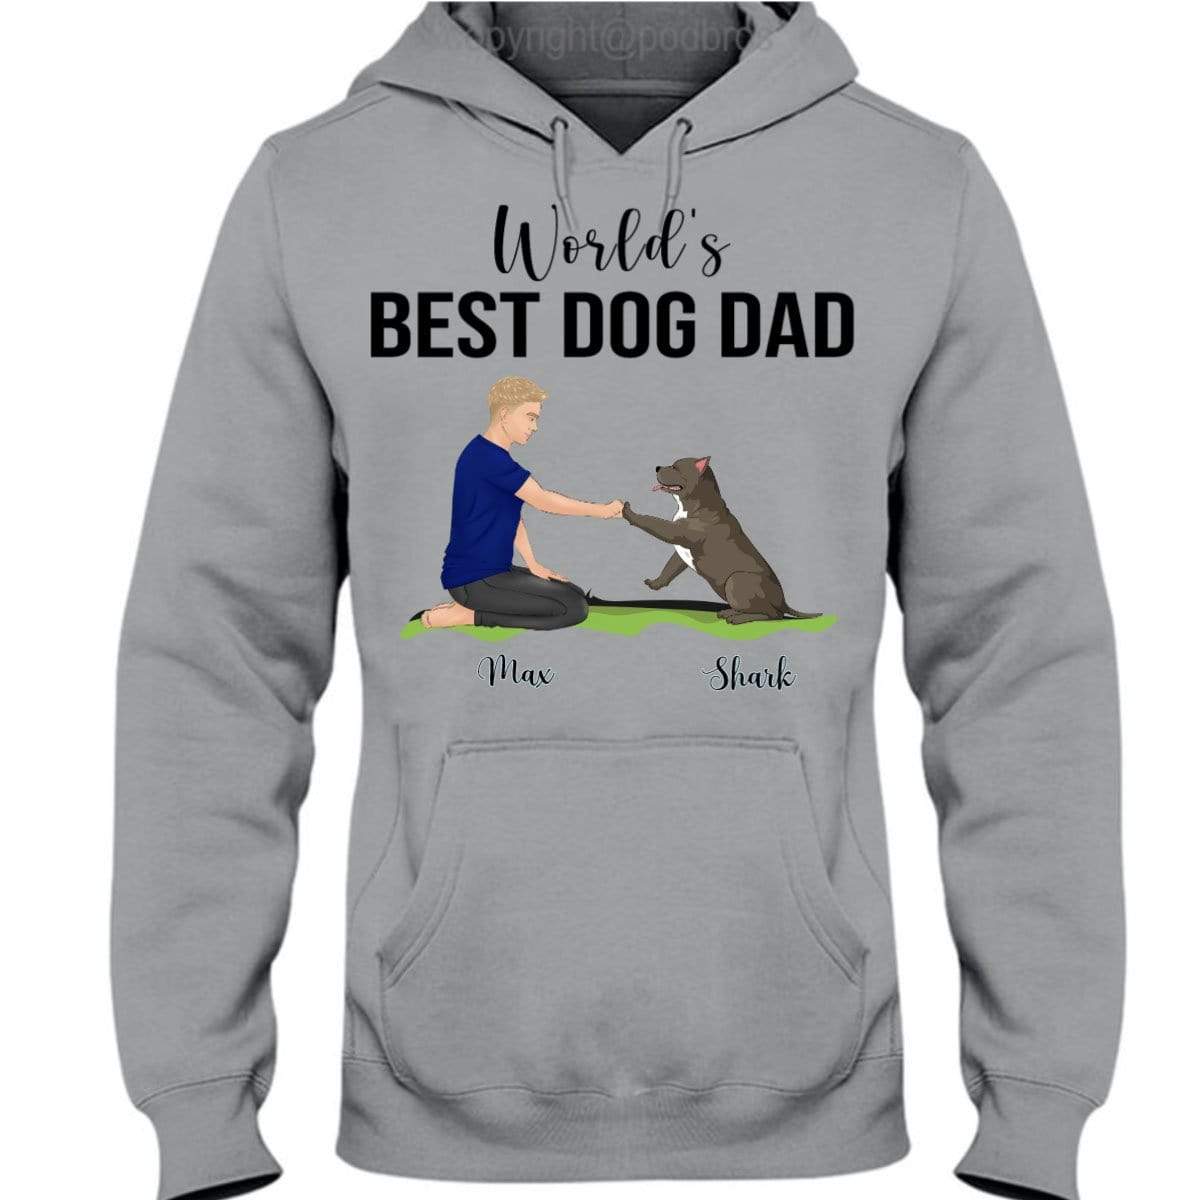 GeckoCustom Personalized Custom T Shirt, Dog Lover Gift, Fathers Day Gift, The Best Dog Dad Ever